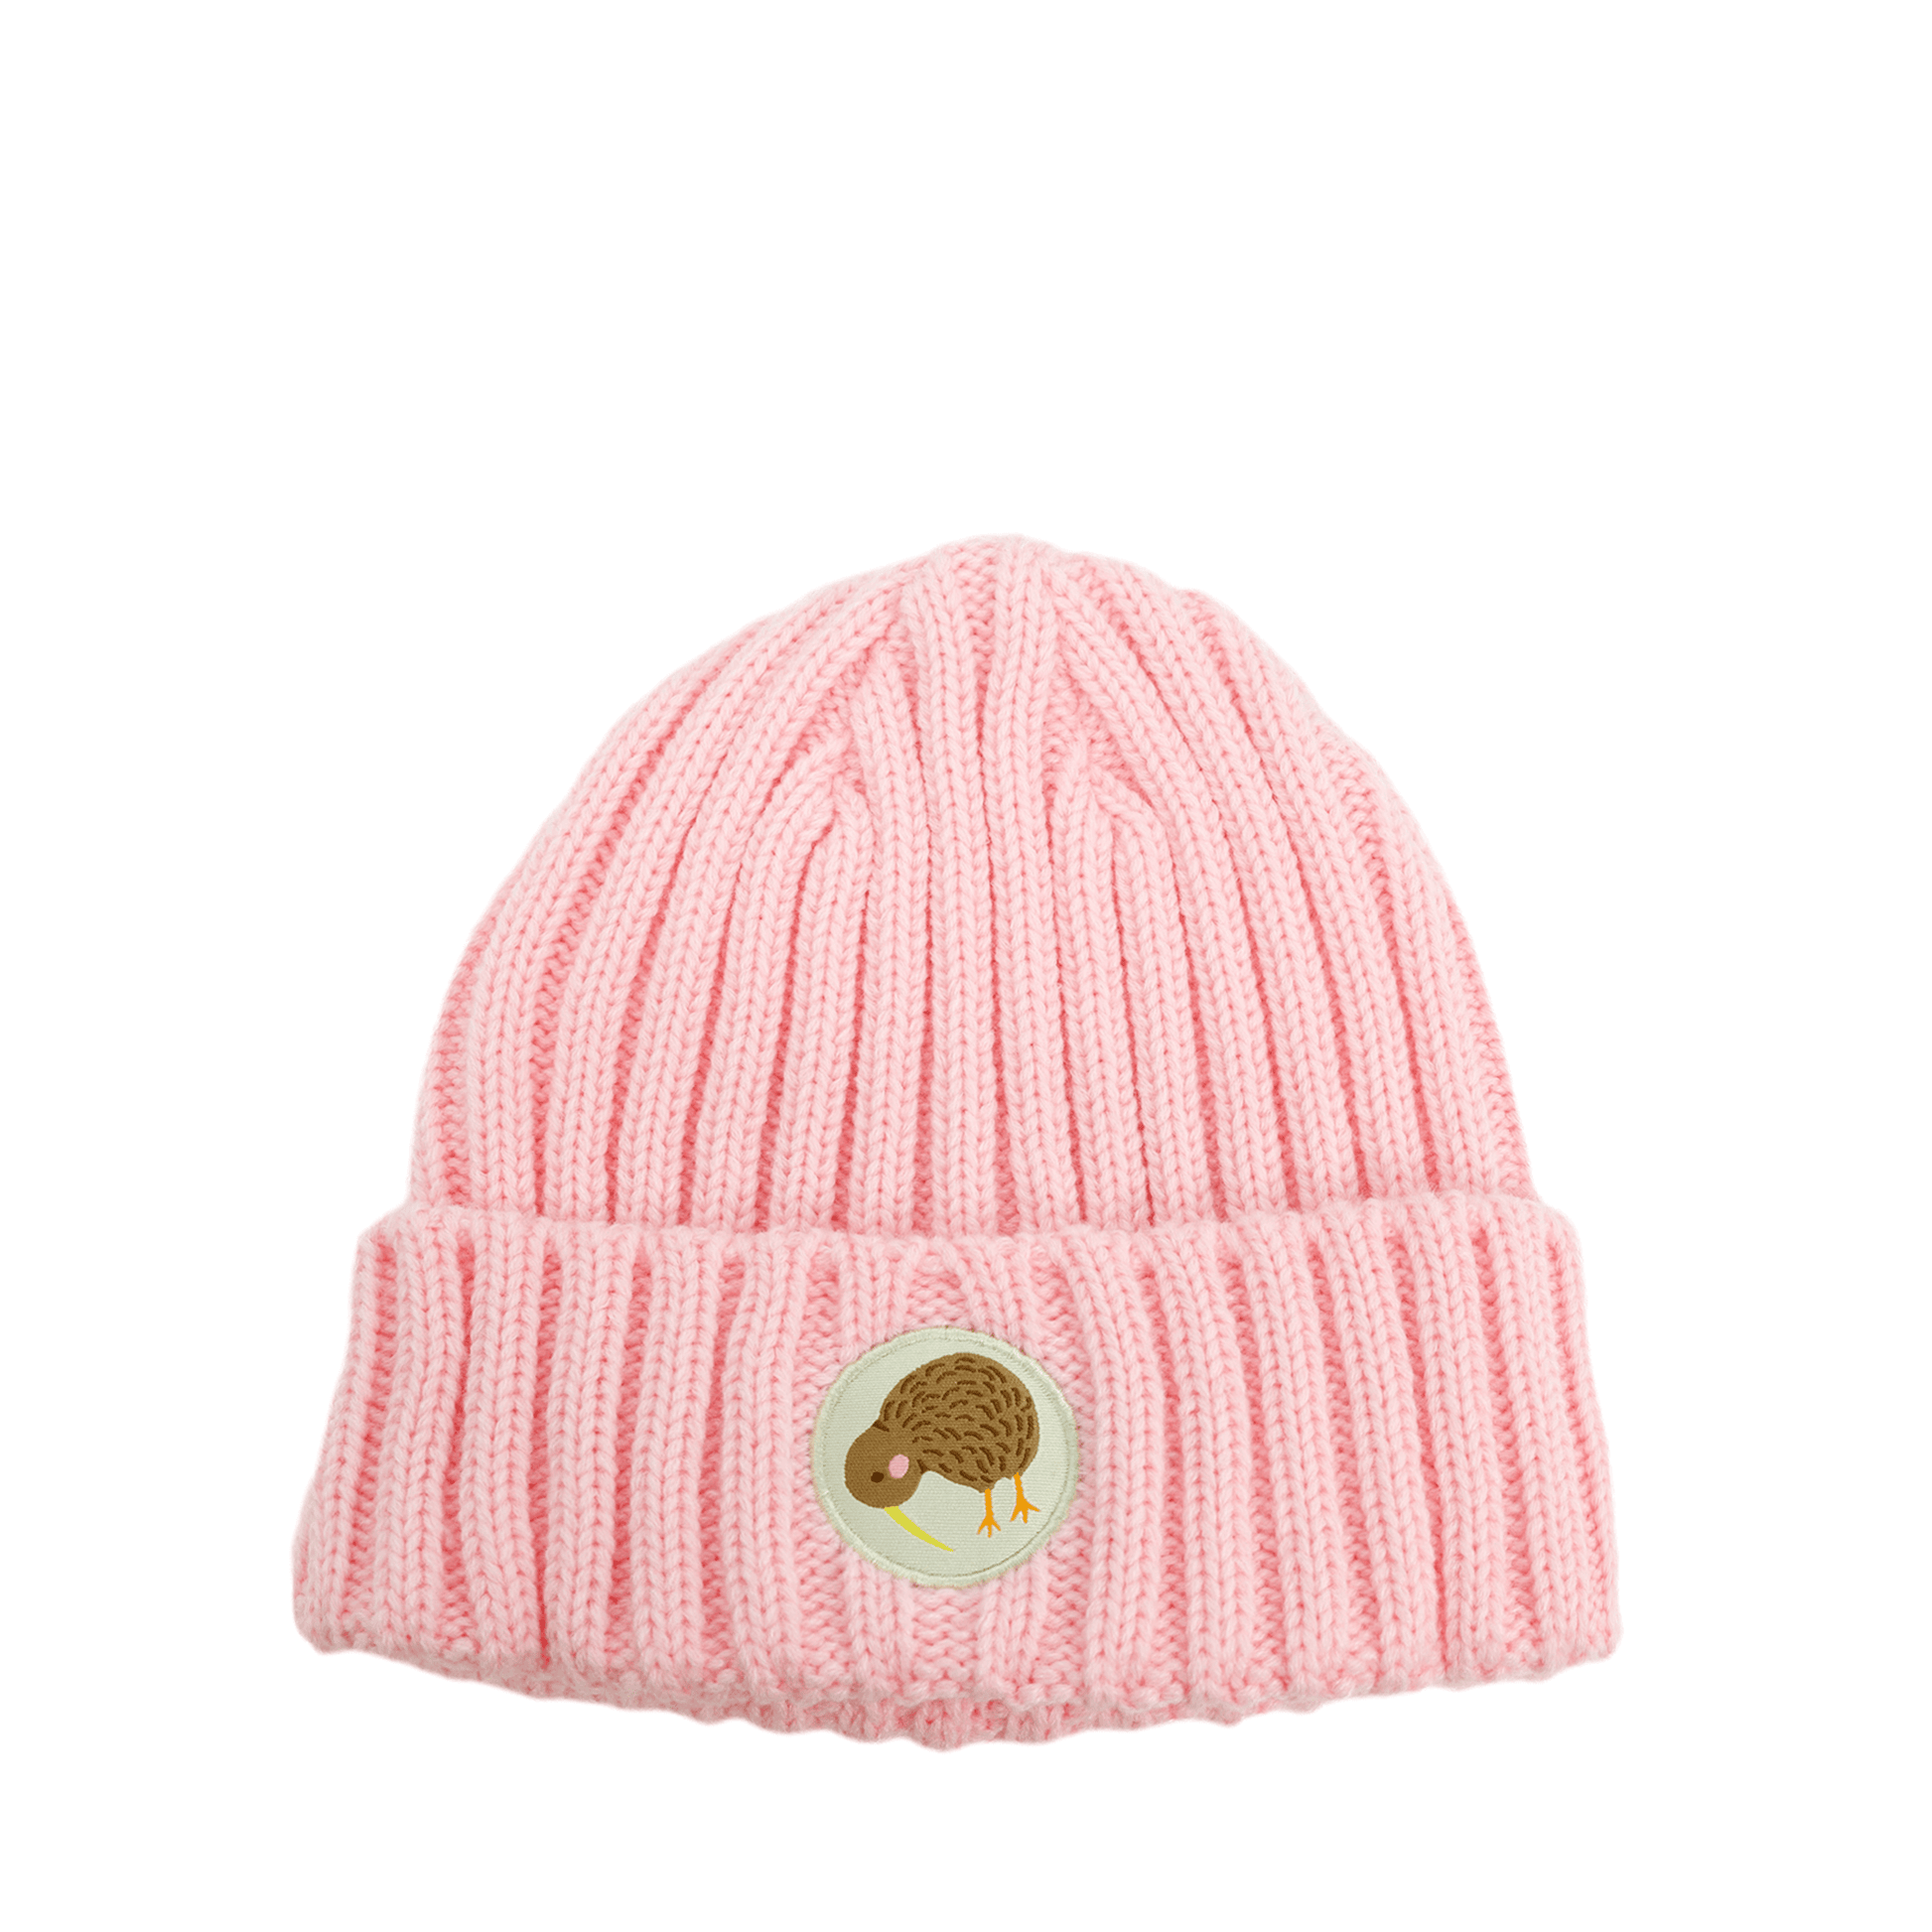 Kids pink knit beanie with Kiwi emblem on the front.